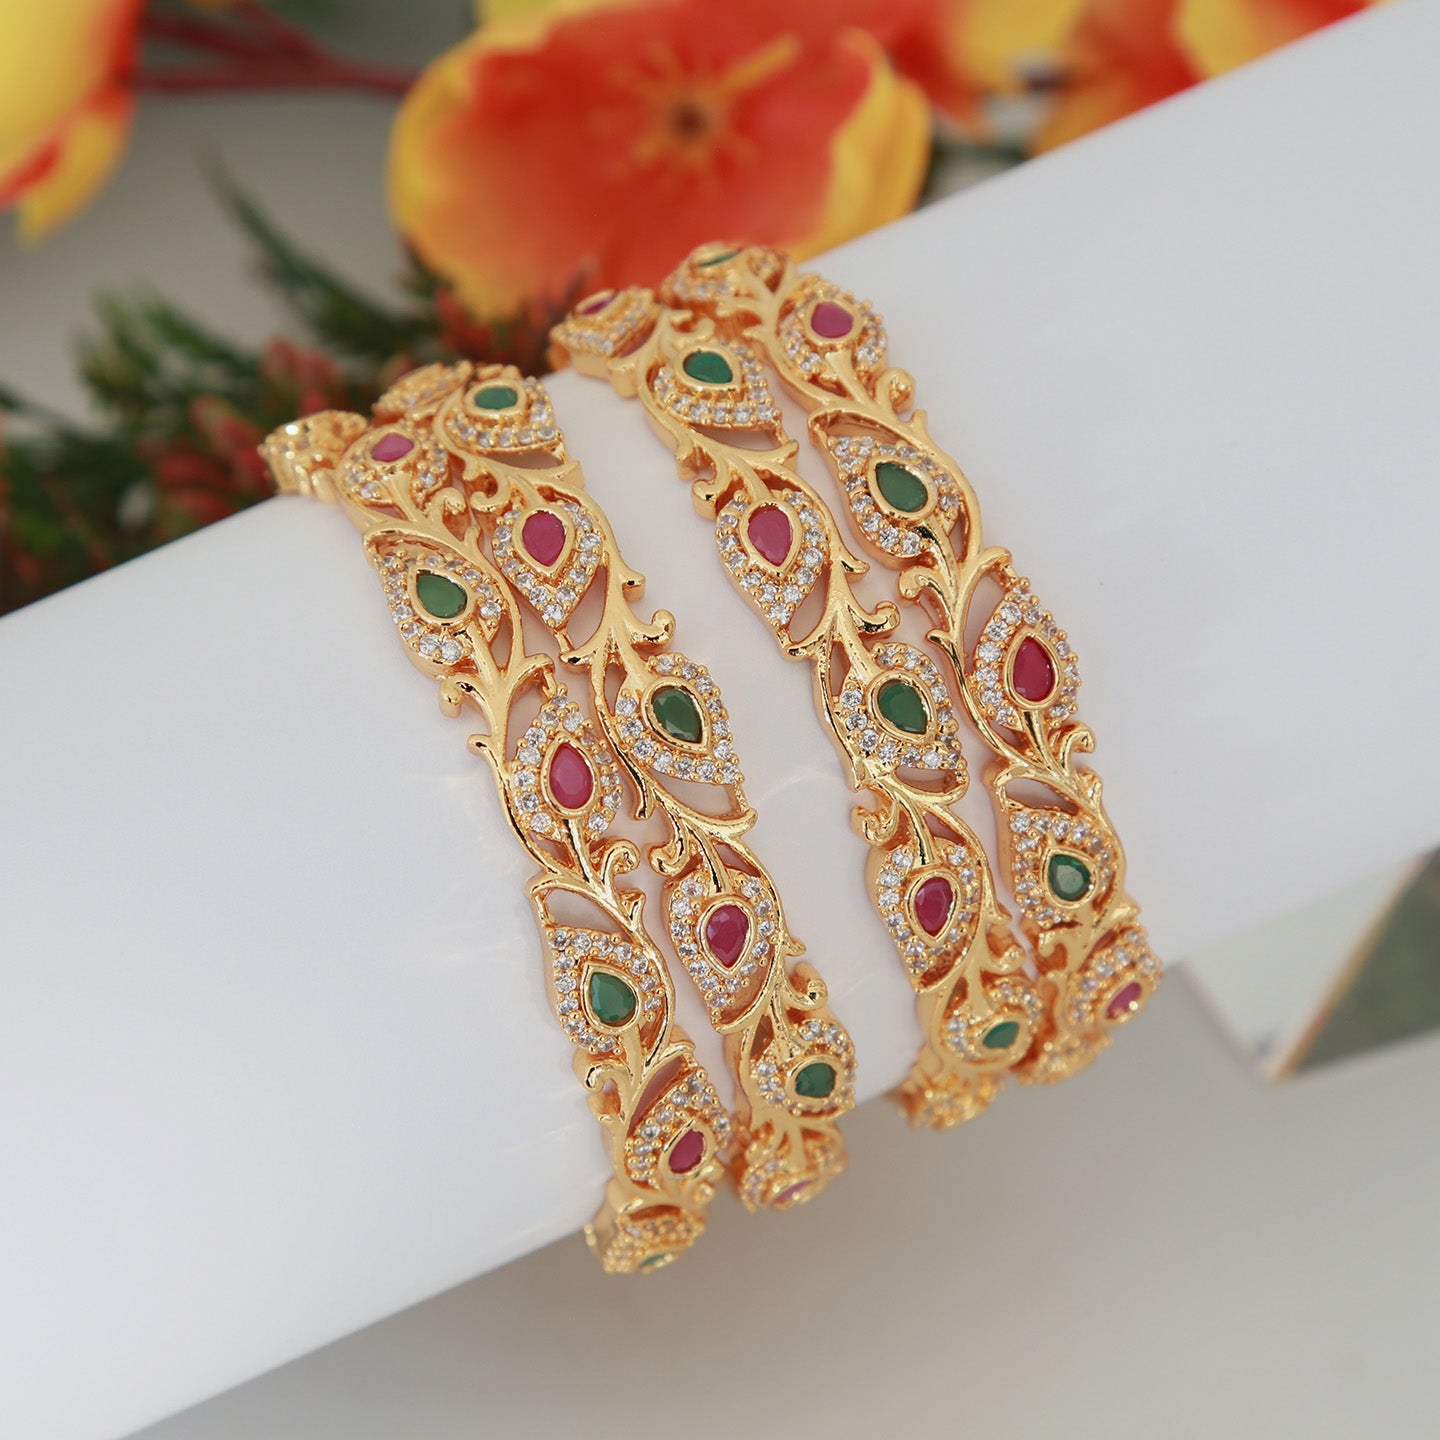 Gold Plated American Diamond CZ AD bangles set of 4 | Ruby Emerald white stone Leaf Design bangles|Indian Bollywood style Party wear jewelry